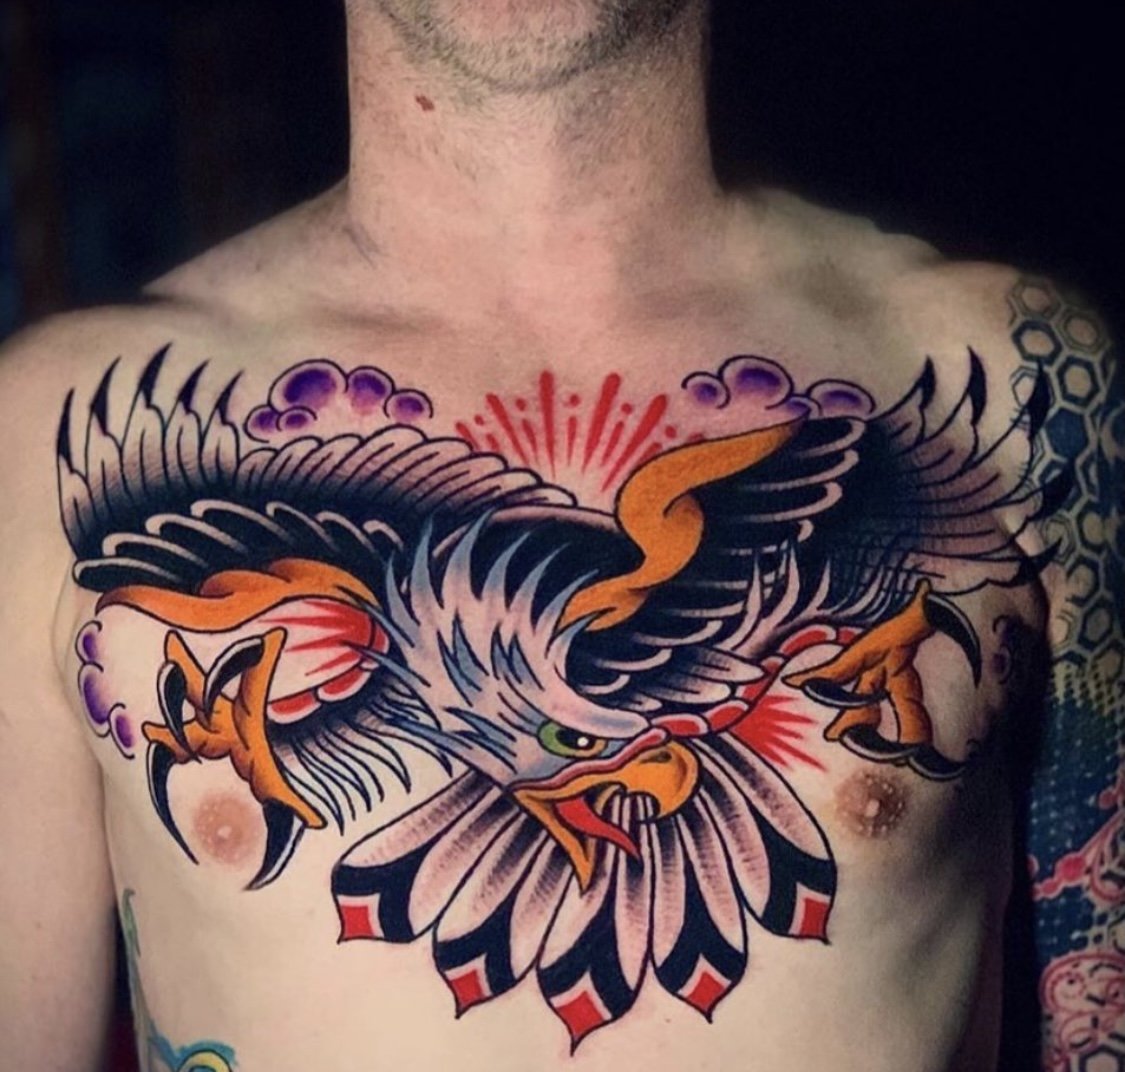 40 Best Eagle Tattoos for Men: Top Ideas and Designs 2023 | FashionBeans